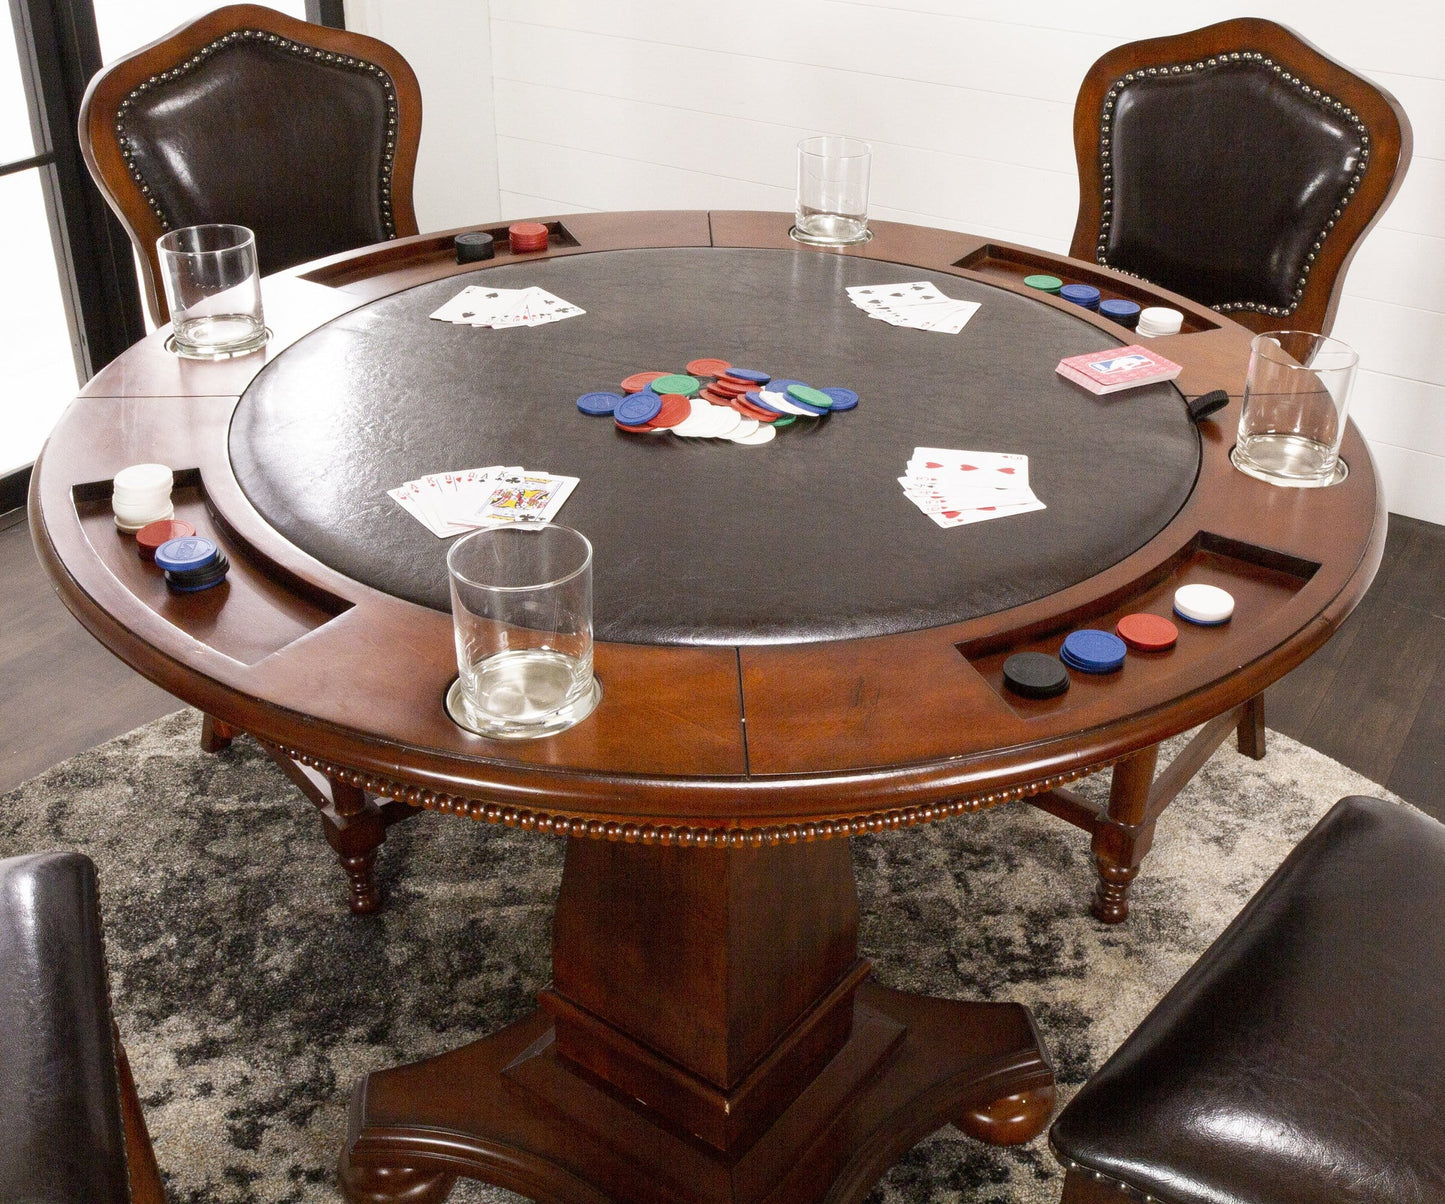 Counter height poker table set